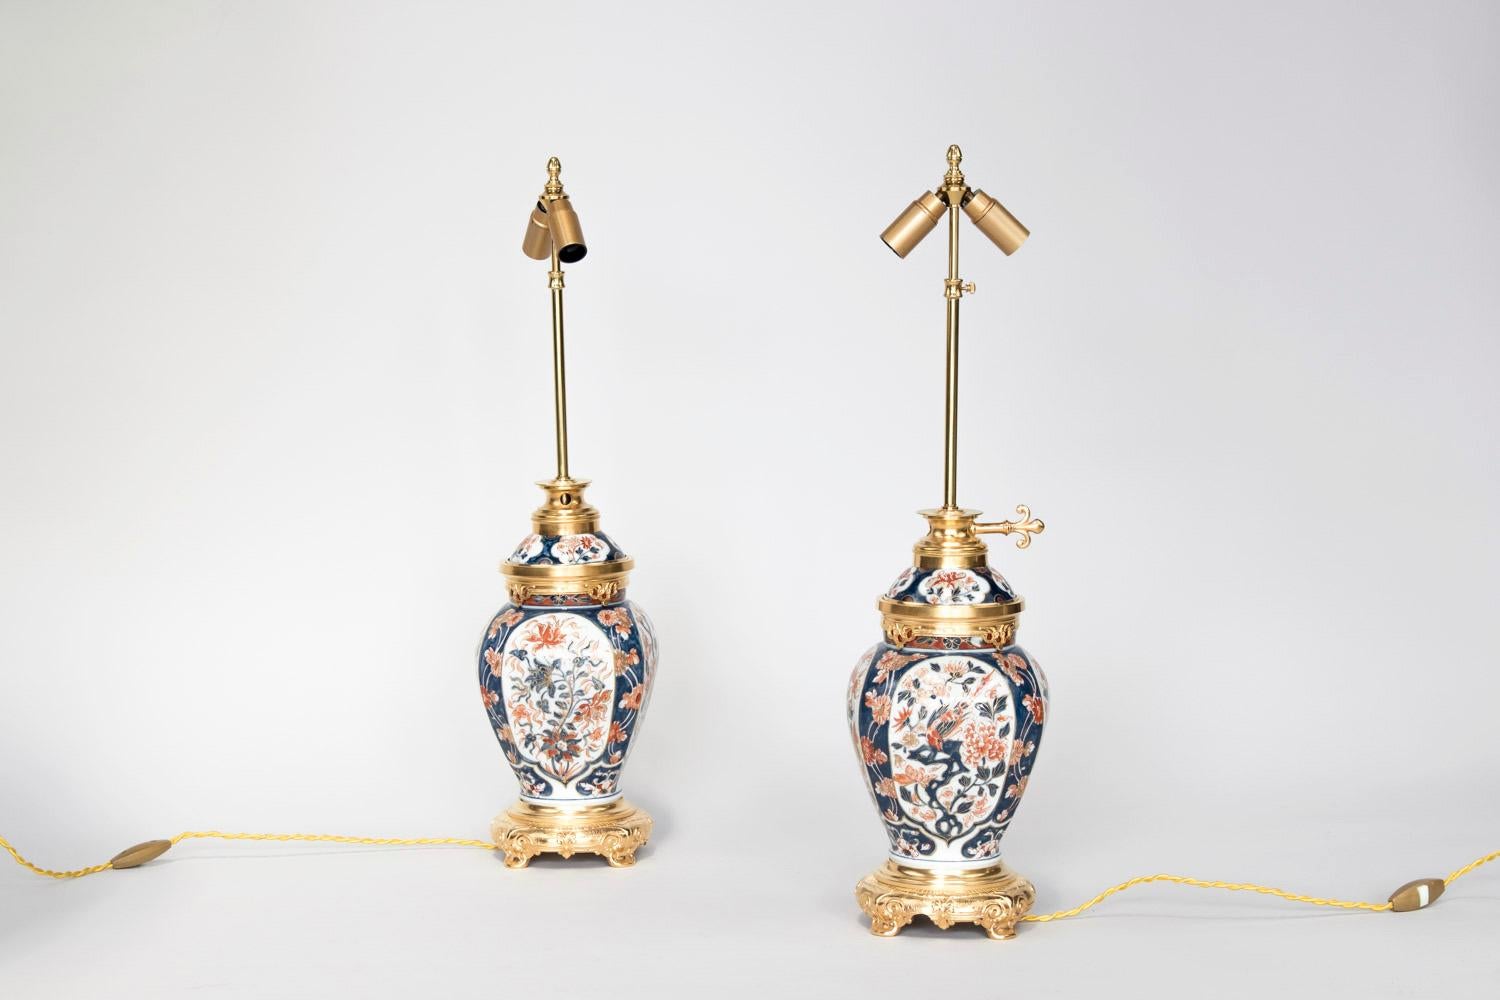 Pair of canted corners vase shaped lamps in Imari Porcelain. Chiselled and gilt bronze mount, standing on a circular quadripod base with motifs of scrolls.
Blue background body lamp decorated with red flowers framing four large white background